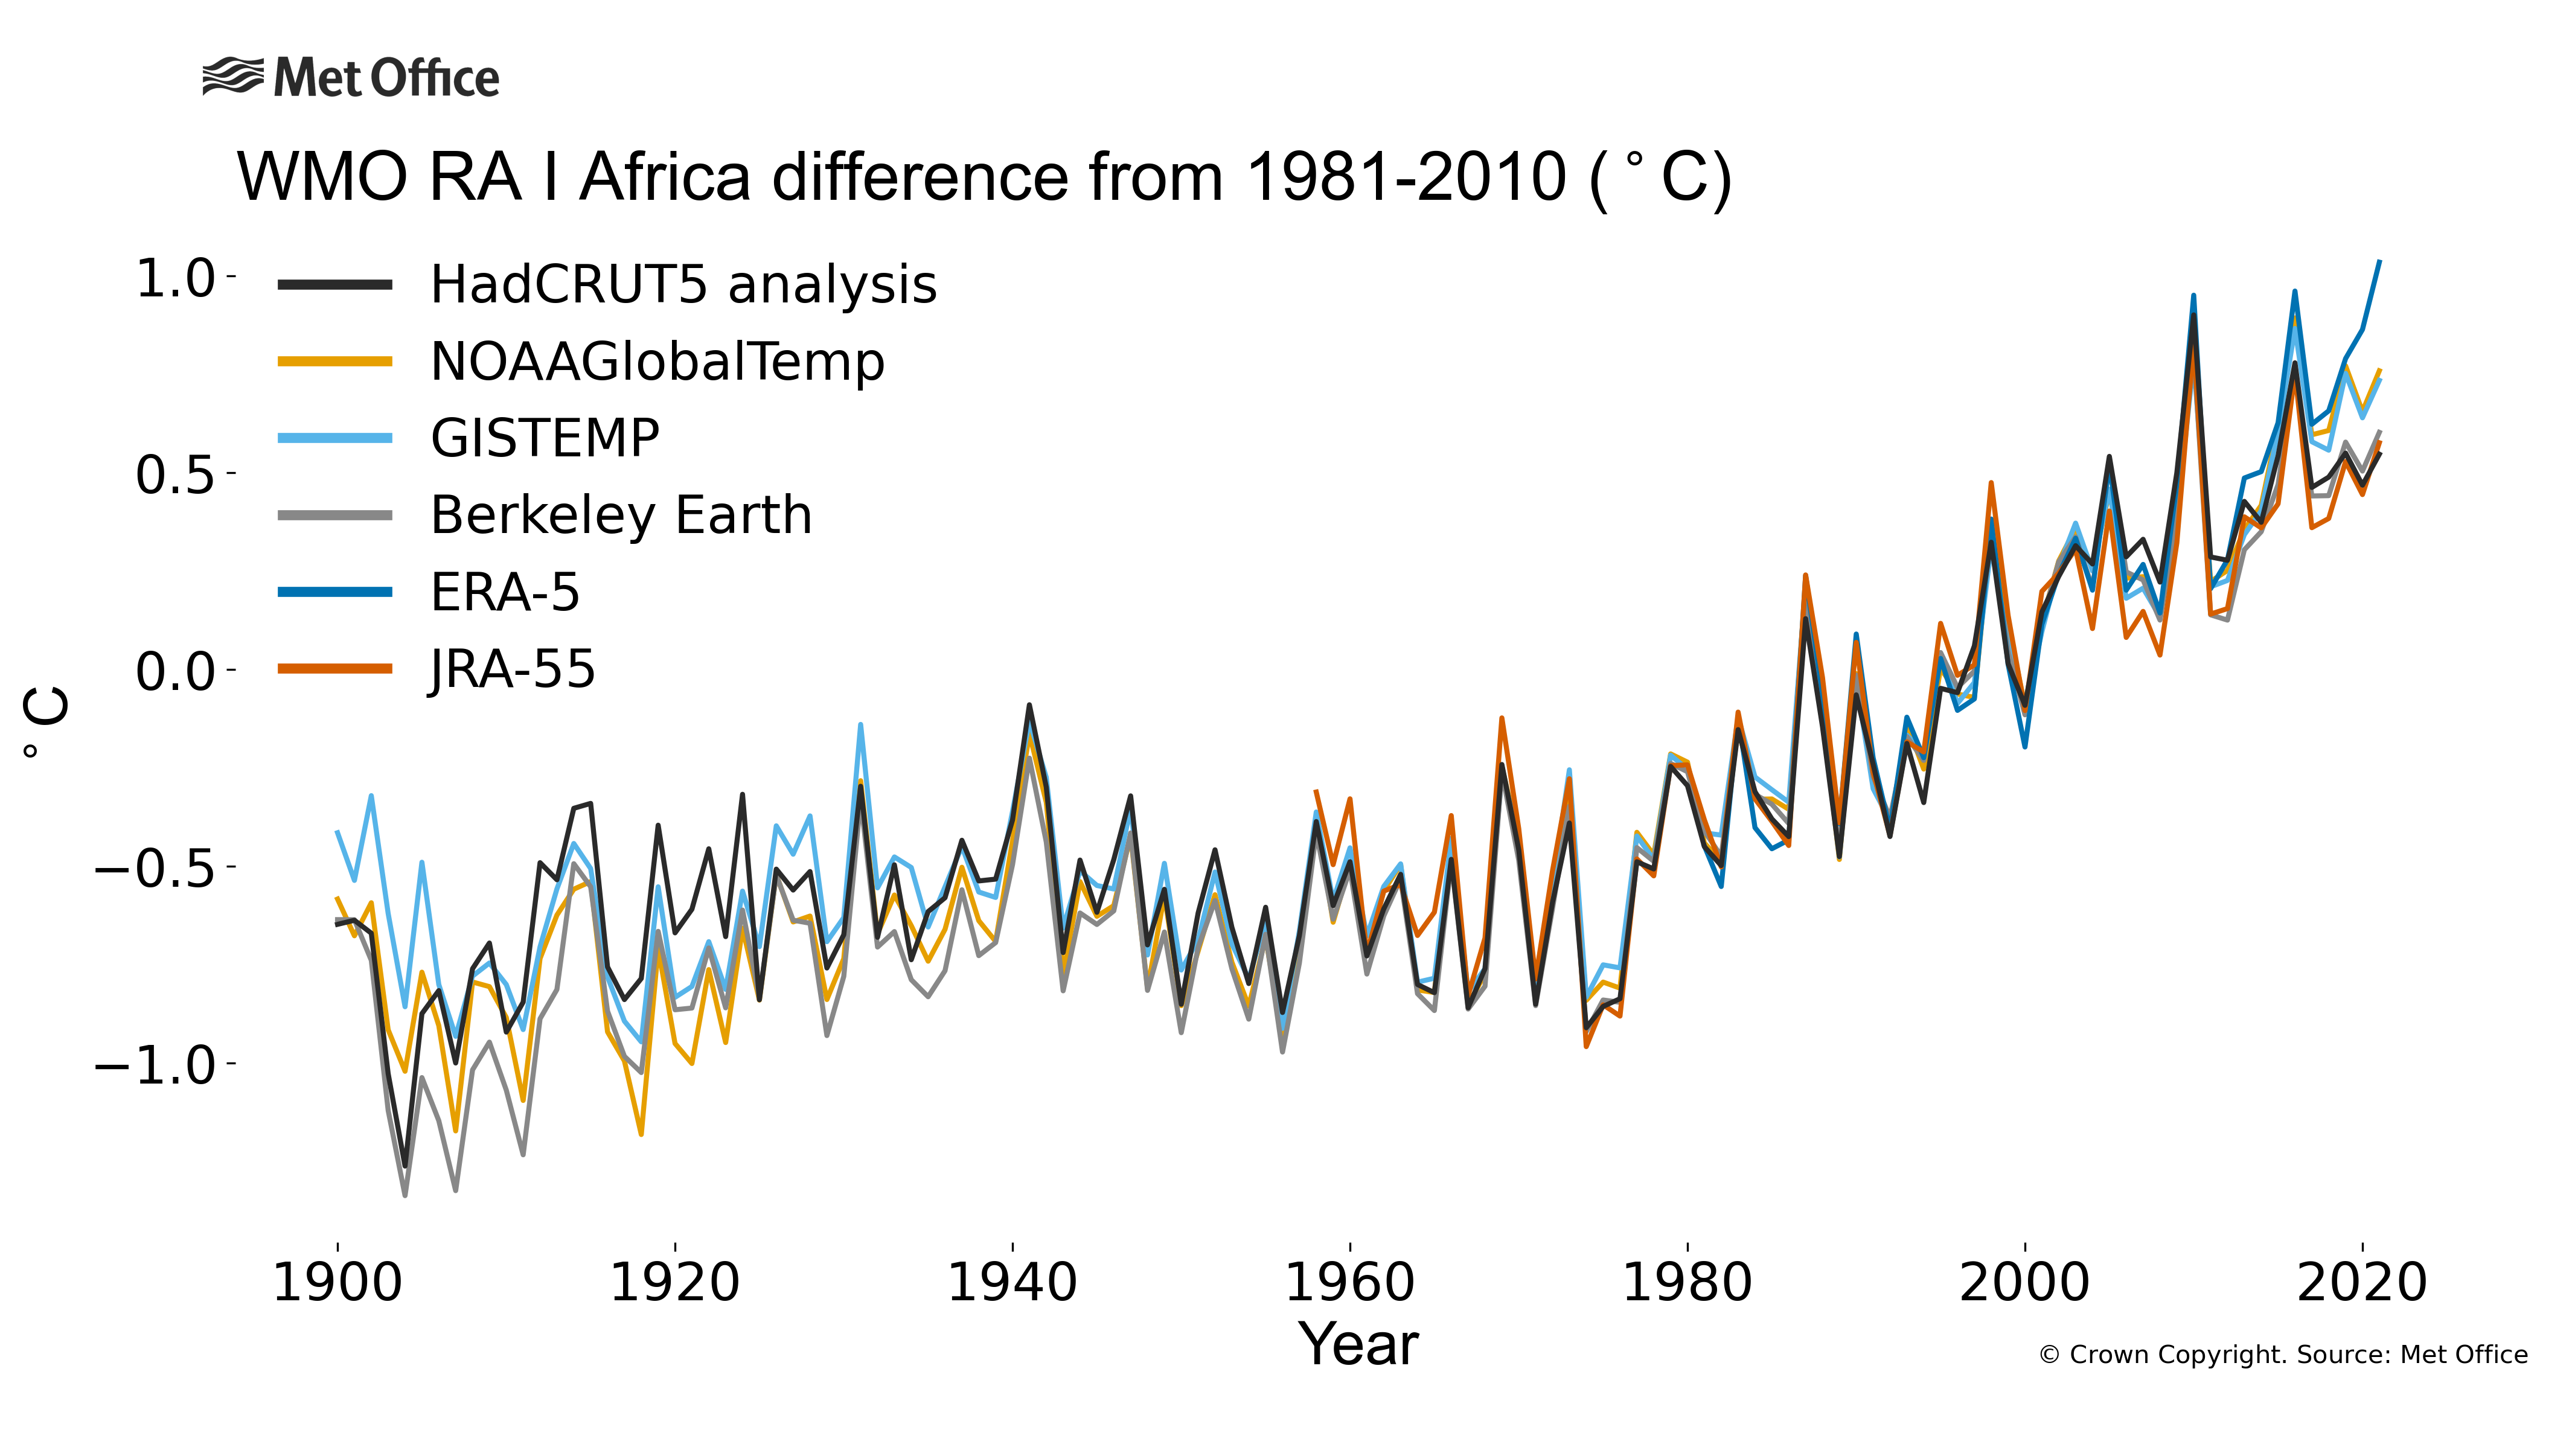 
The plot shows annual average temperature anomalies (relative to 1981-2010) for WMO RA I - Africa. Data are from six different data sets: HadCRUT5, NOAAGlobalTemp, GISTEMP, Berkeley Earth, ERA5 and JRA55.
